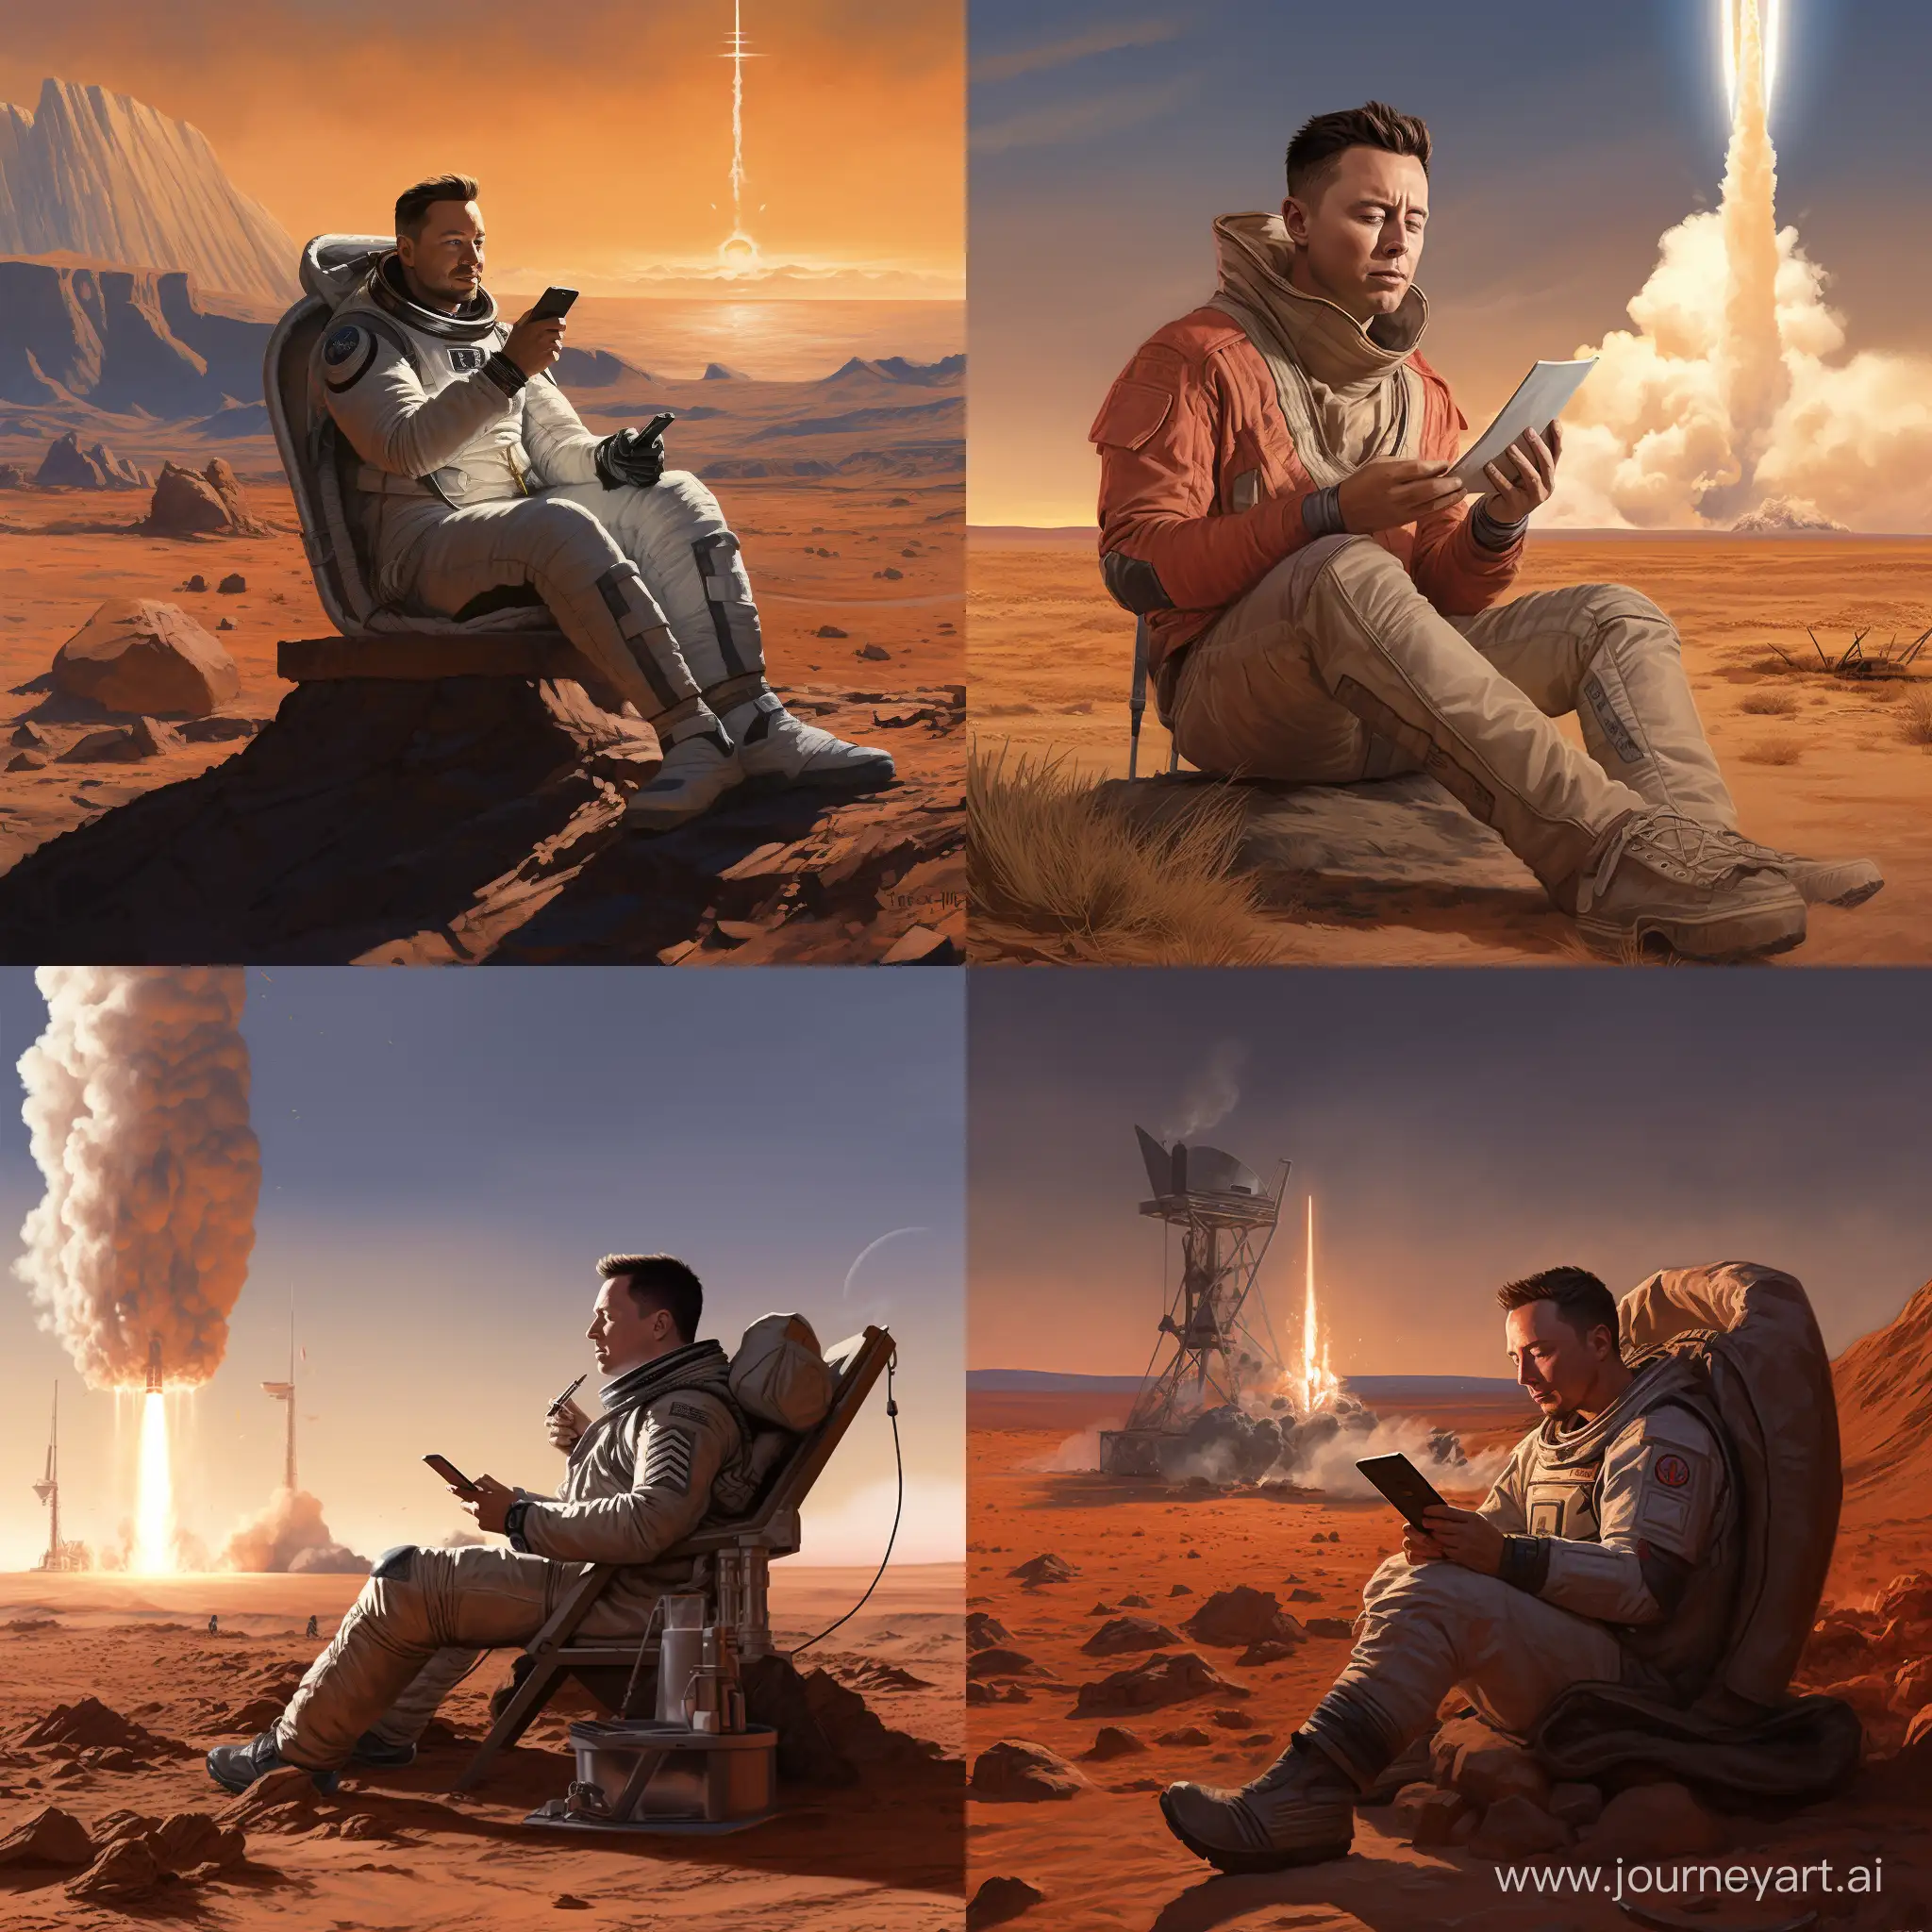 Elon Musk, tweeting on his phone while sitting on the surface of Mars. A SpaceX rocket takes off in the background behind him.